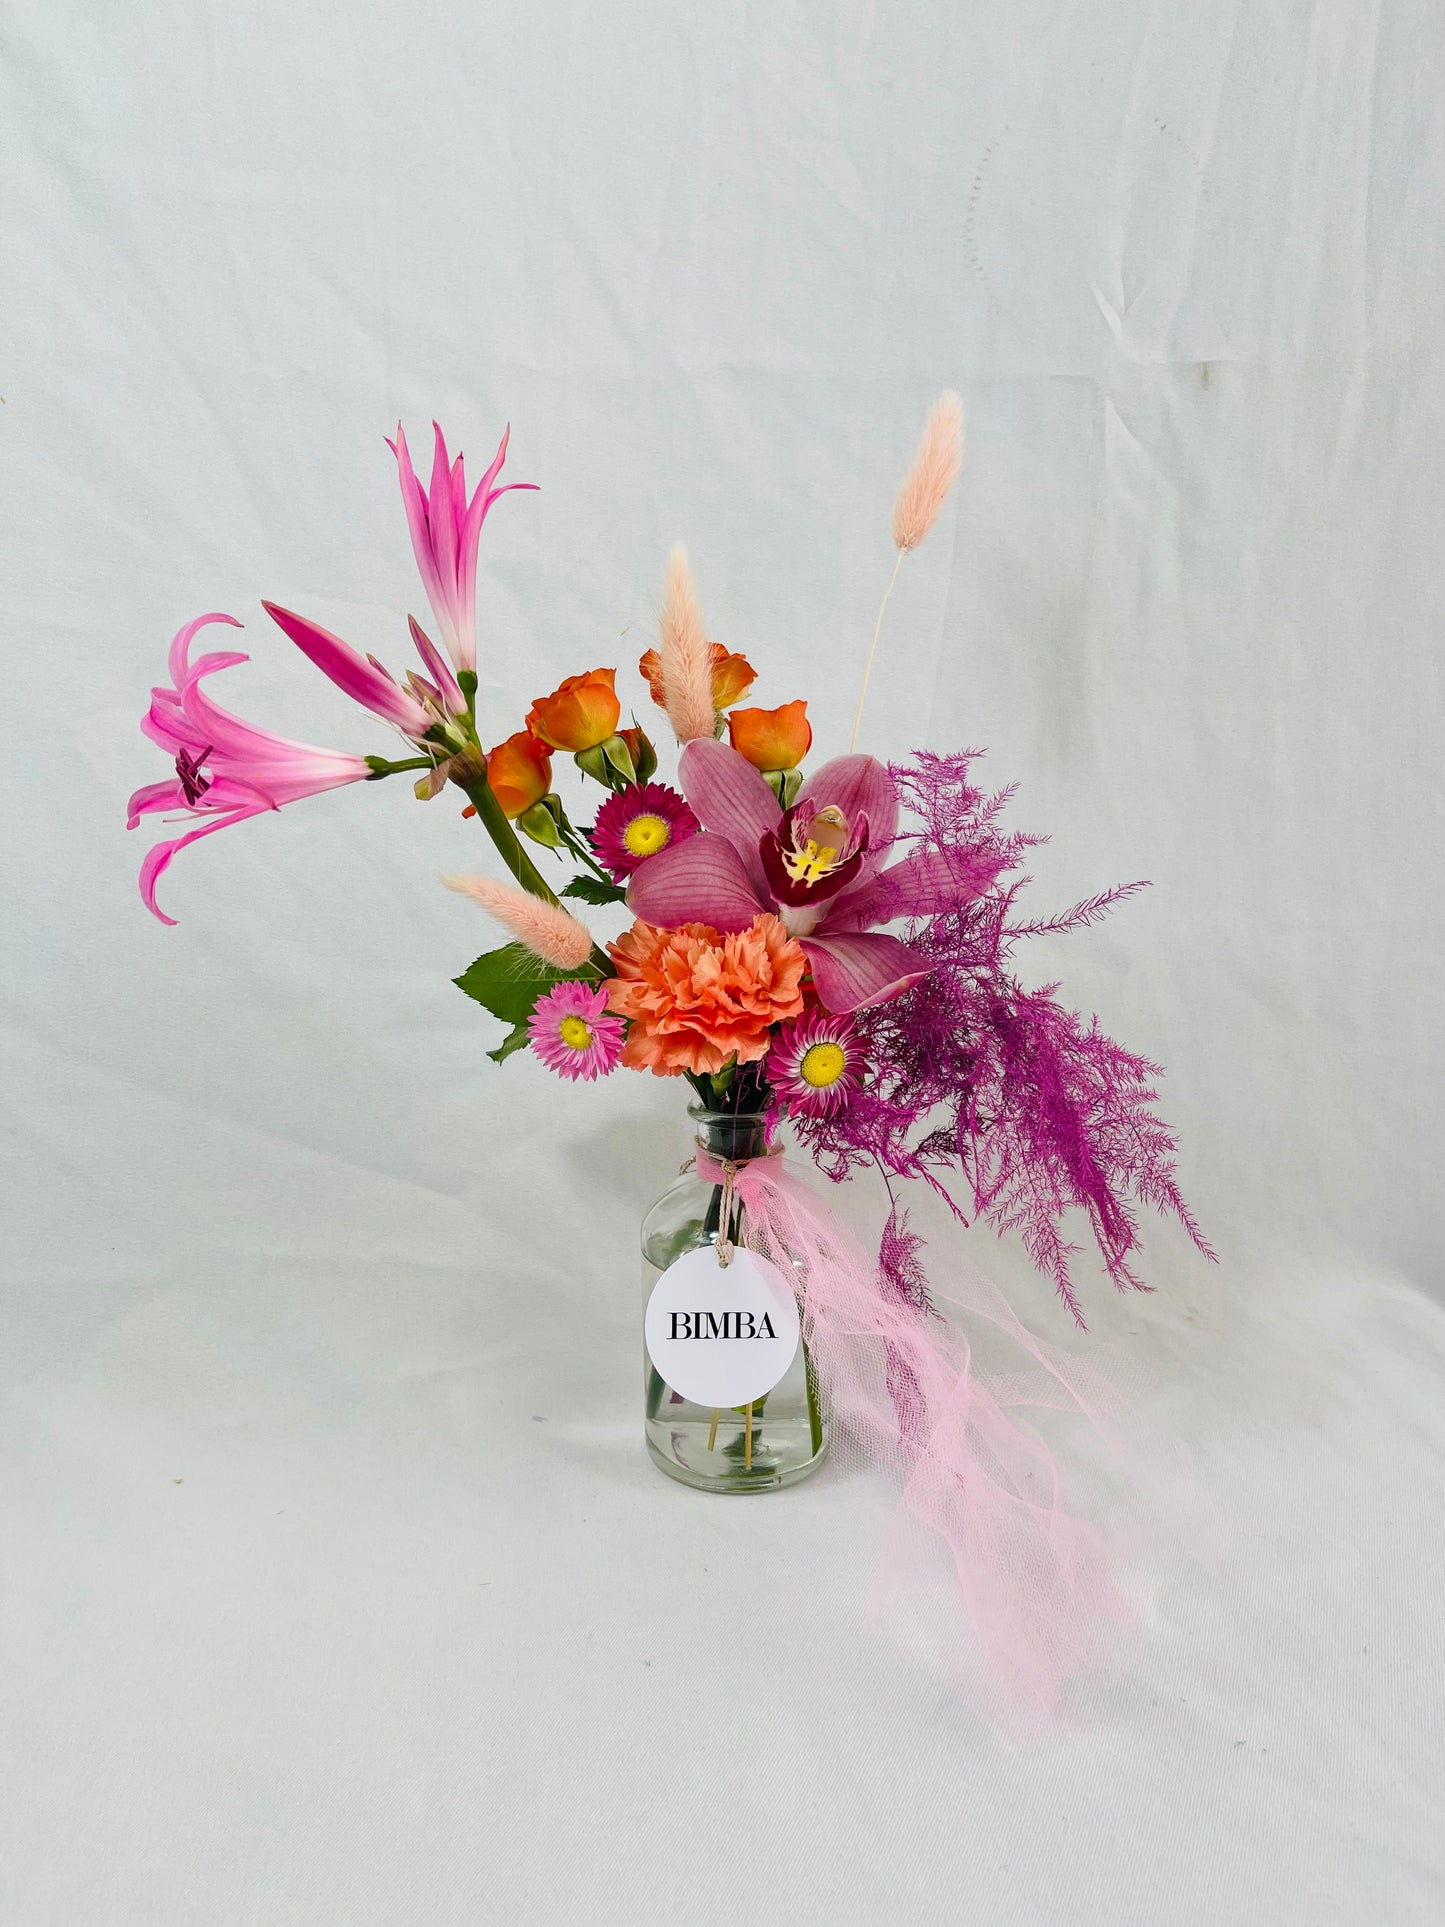 Full of grace mini floral arrangement, in hues of fuchsia and orange tones featuring luxury orchids, eye-catching nerine or french Clematis, sweet scented  mini blooms, timeless carnation, dried conserved acroclinium or camomille flower, asparagus fern and bunny tails.